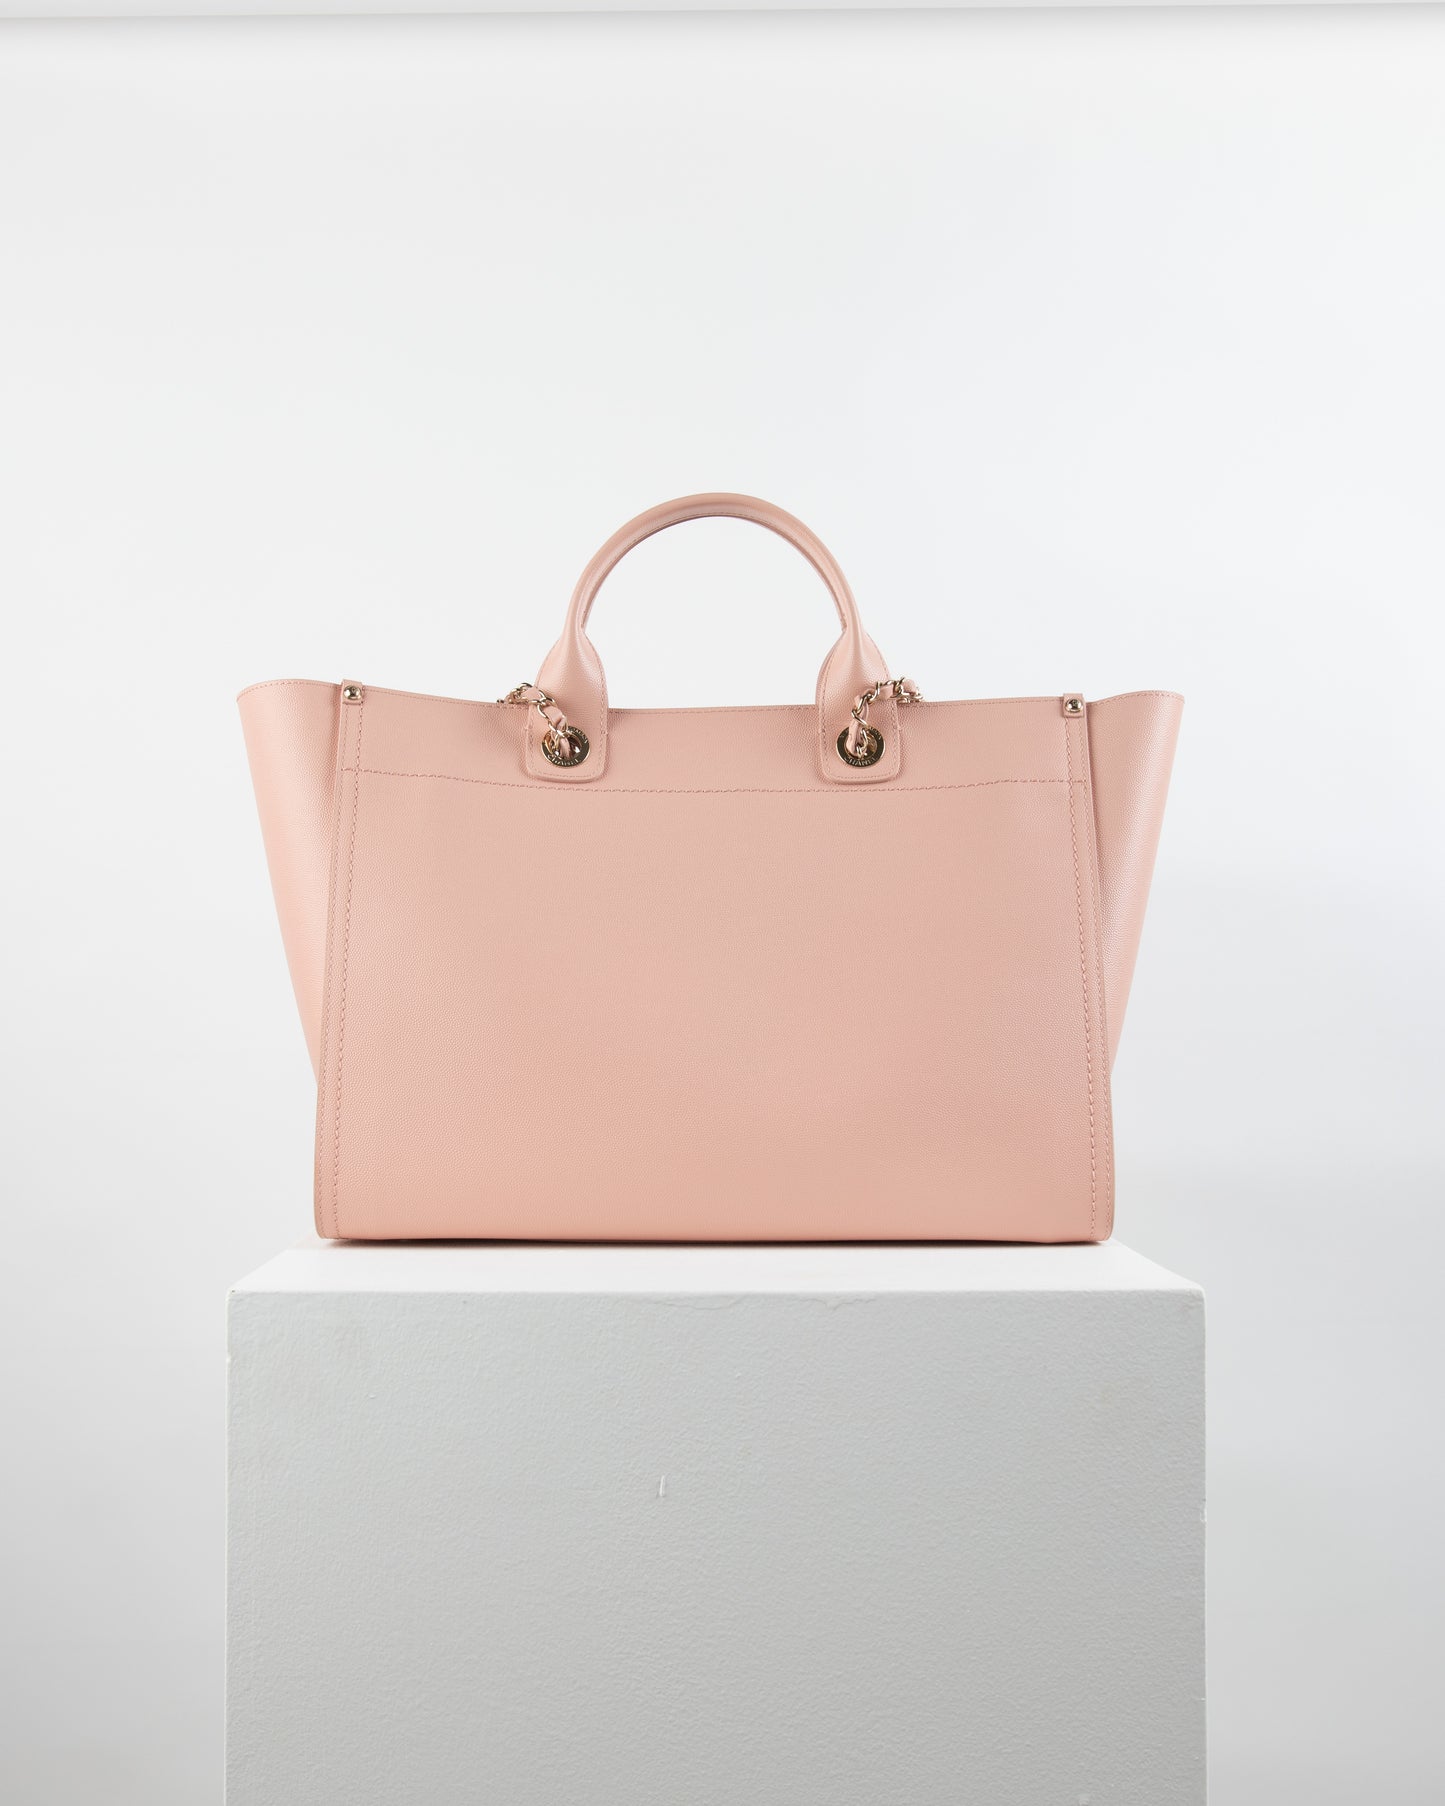 Chanel Deauville Large Pink Tote Bag